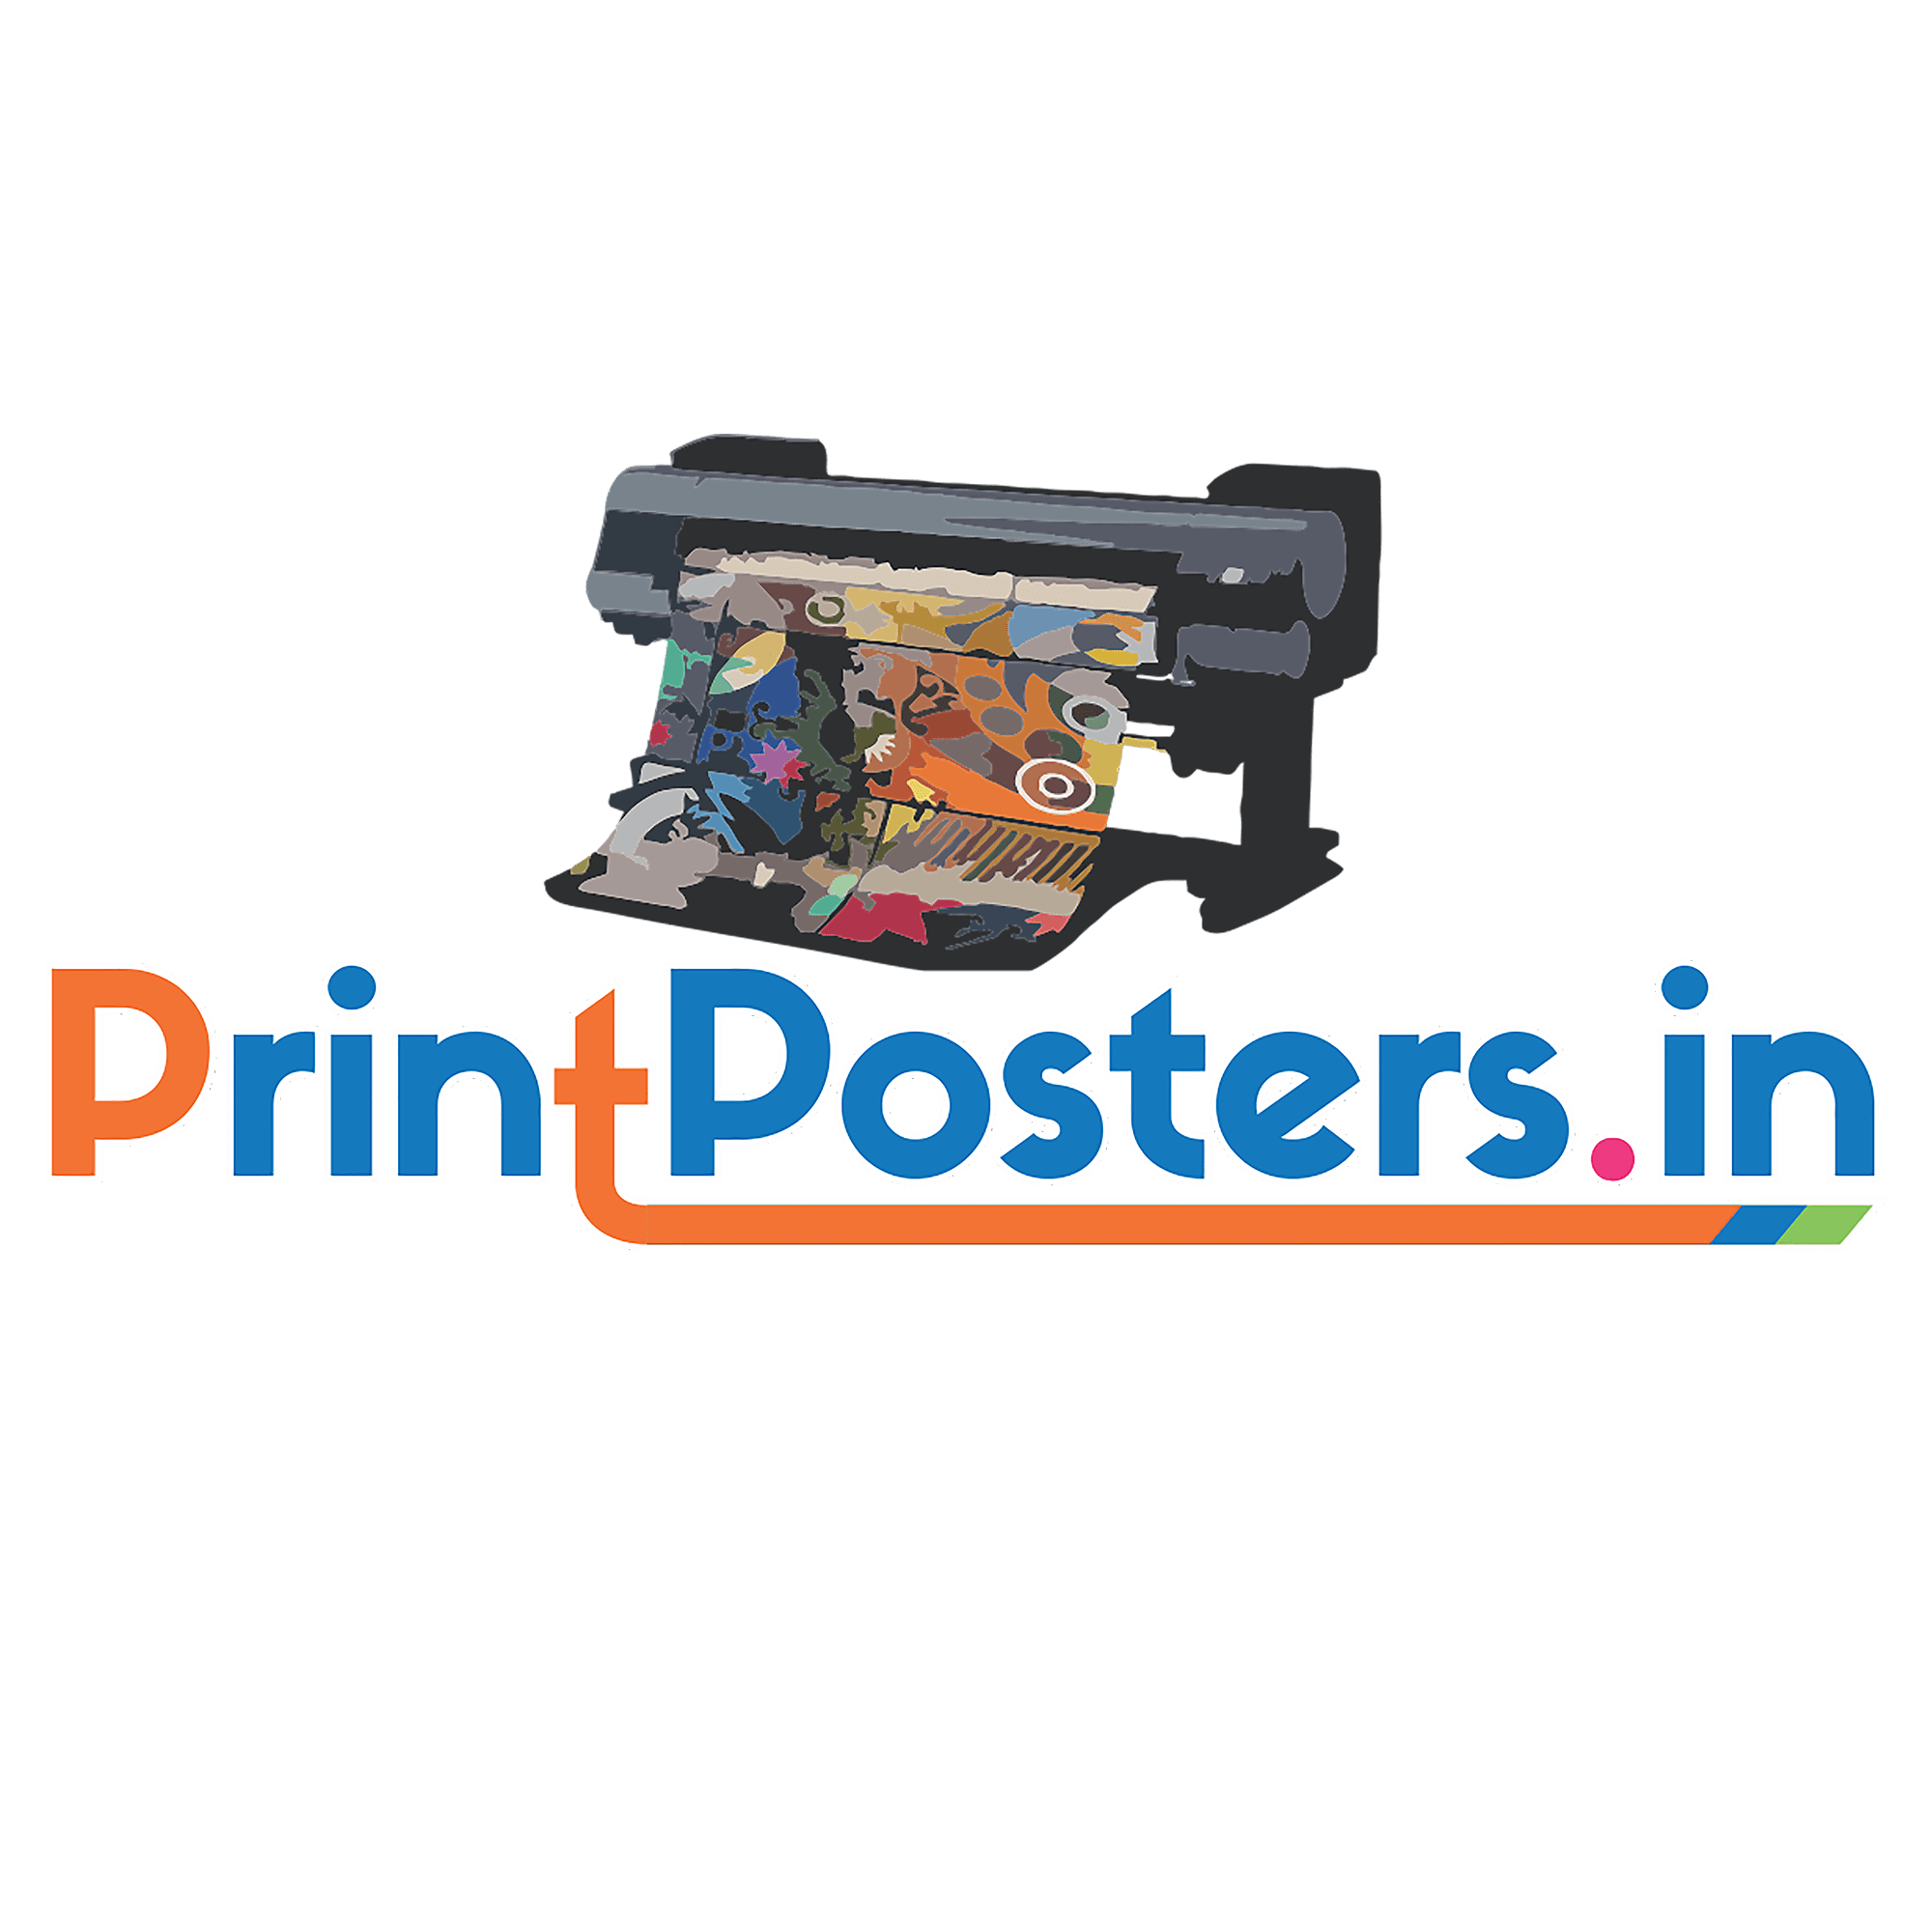 Why choose a company like printposters.in for Canvas Prints in India